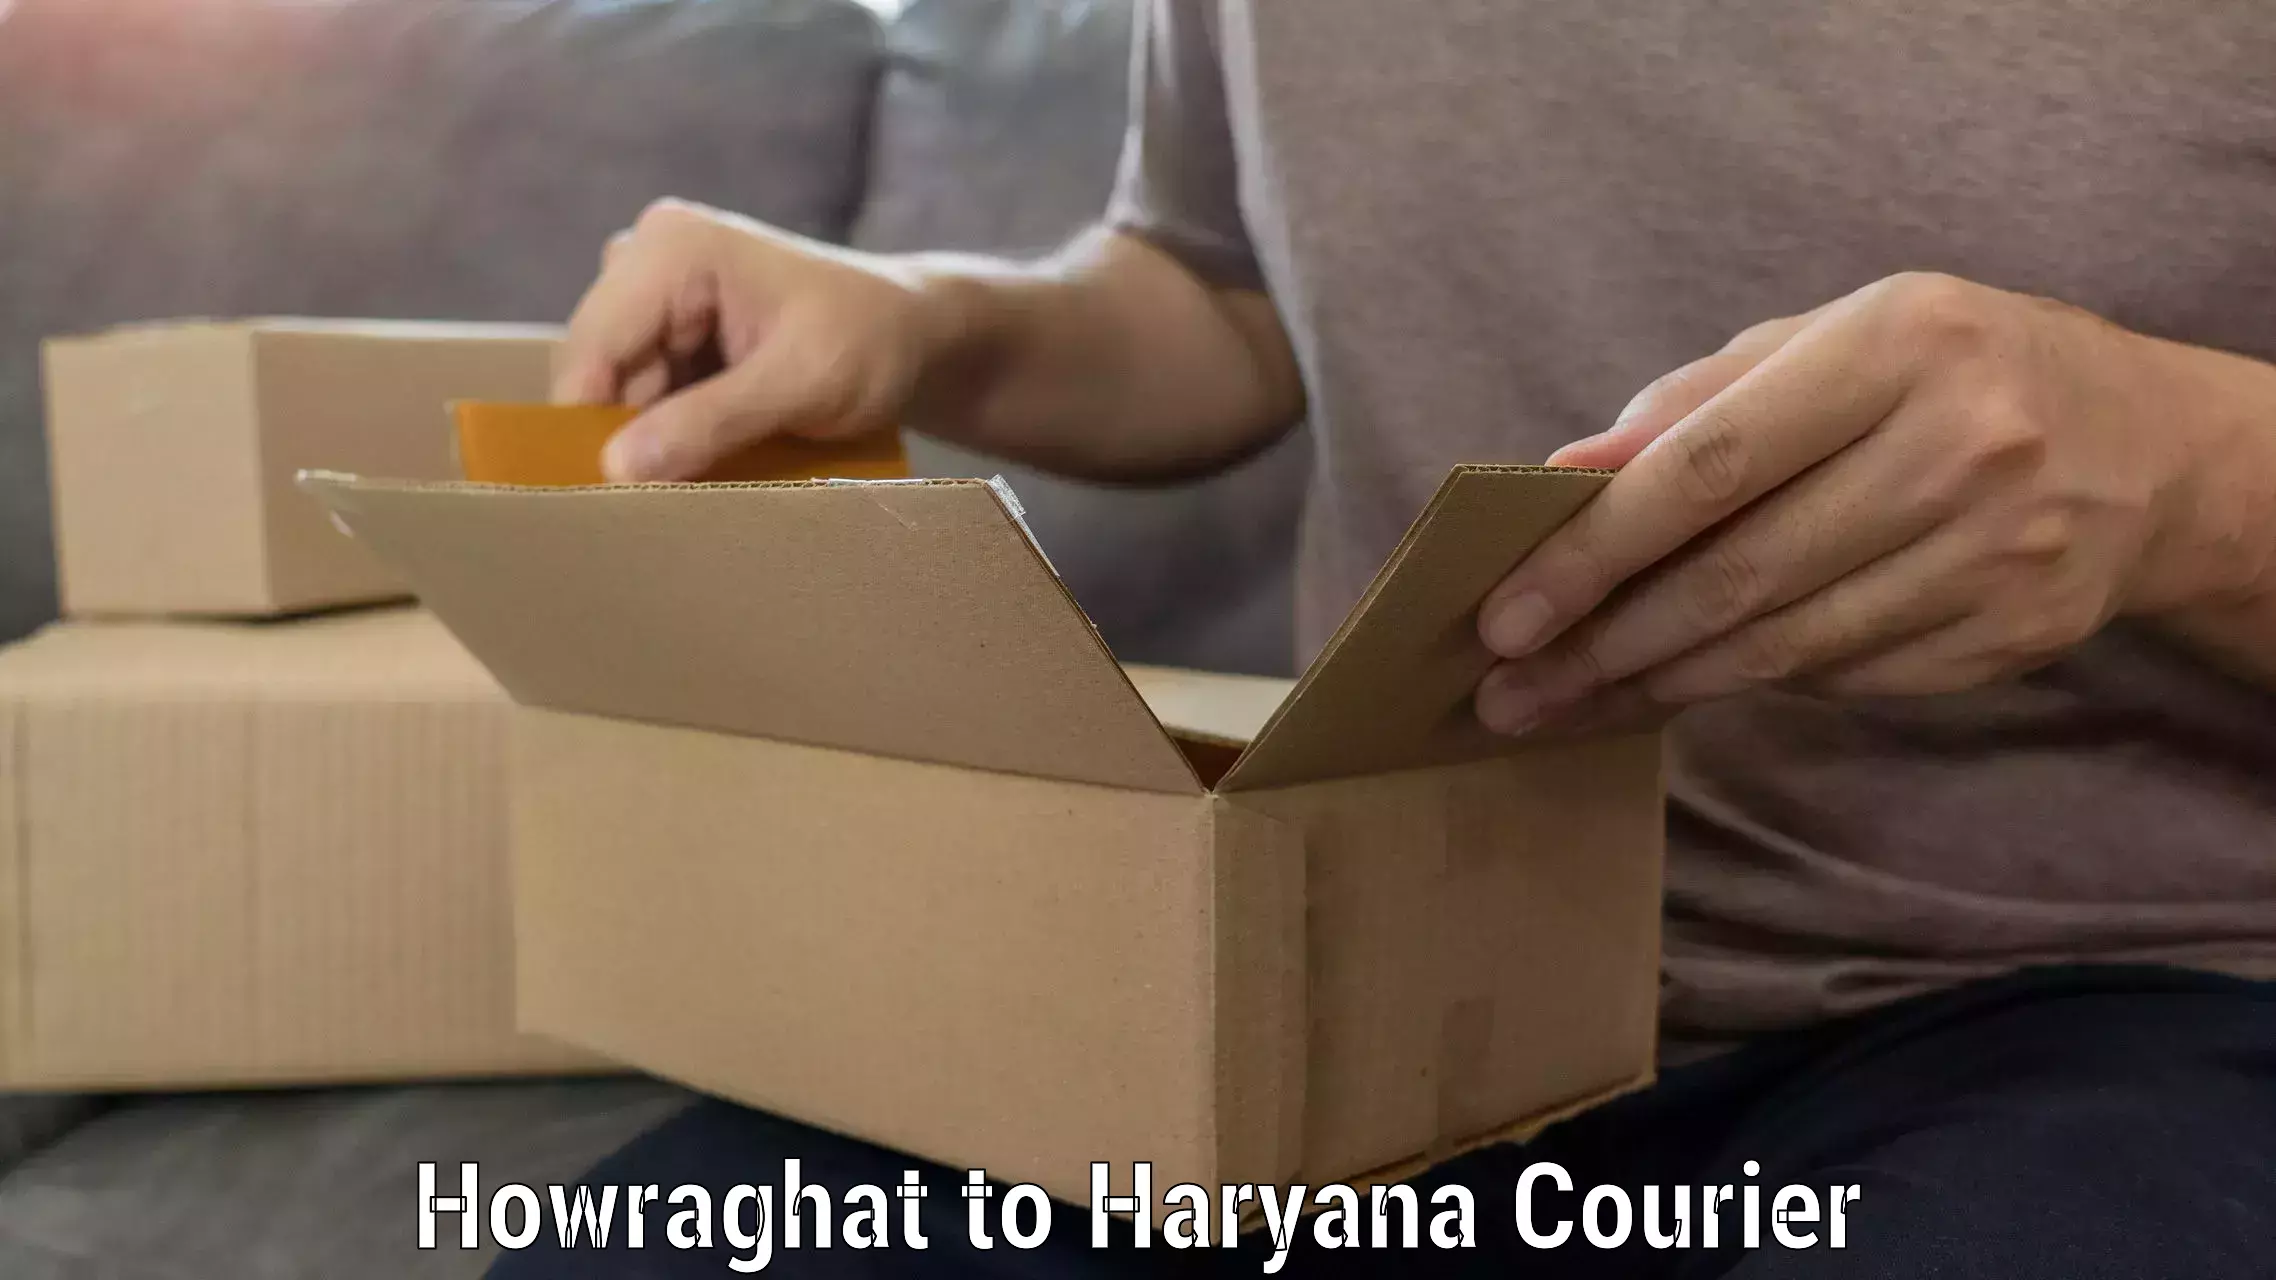 Efficient relocation services Howraghat to Panchkula